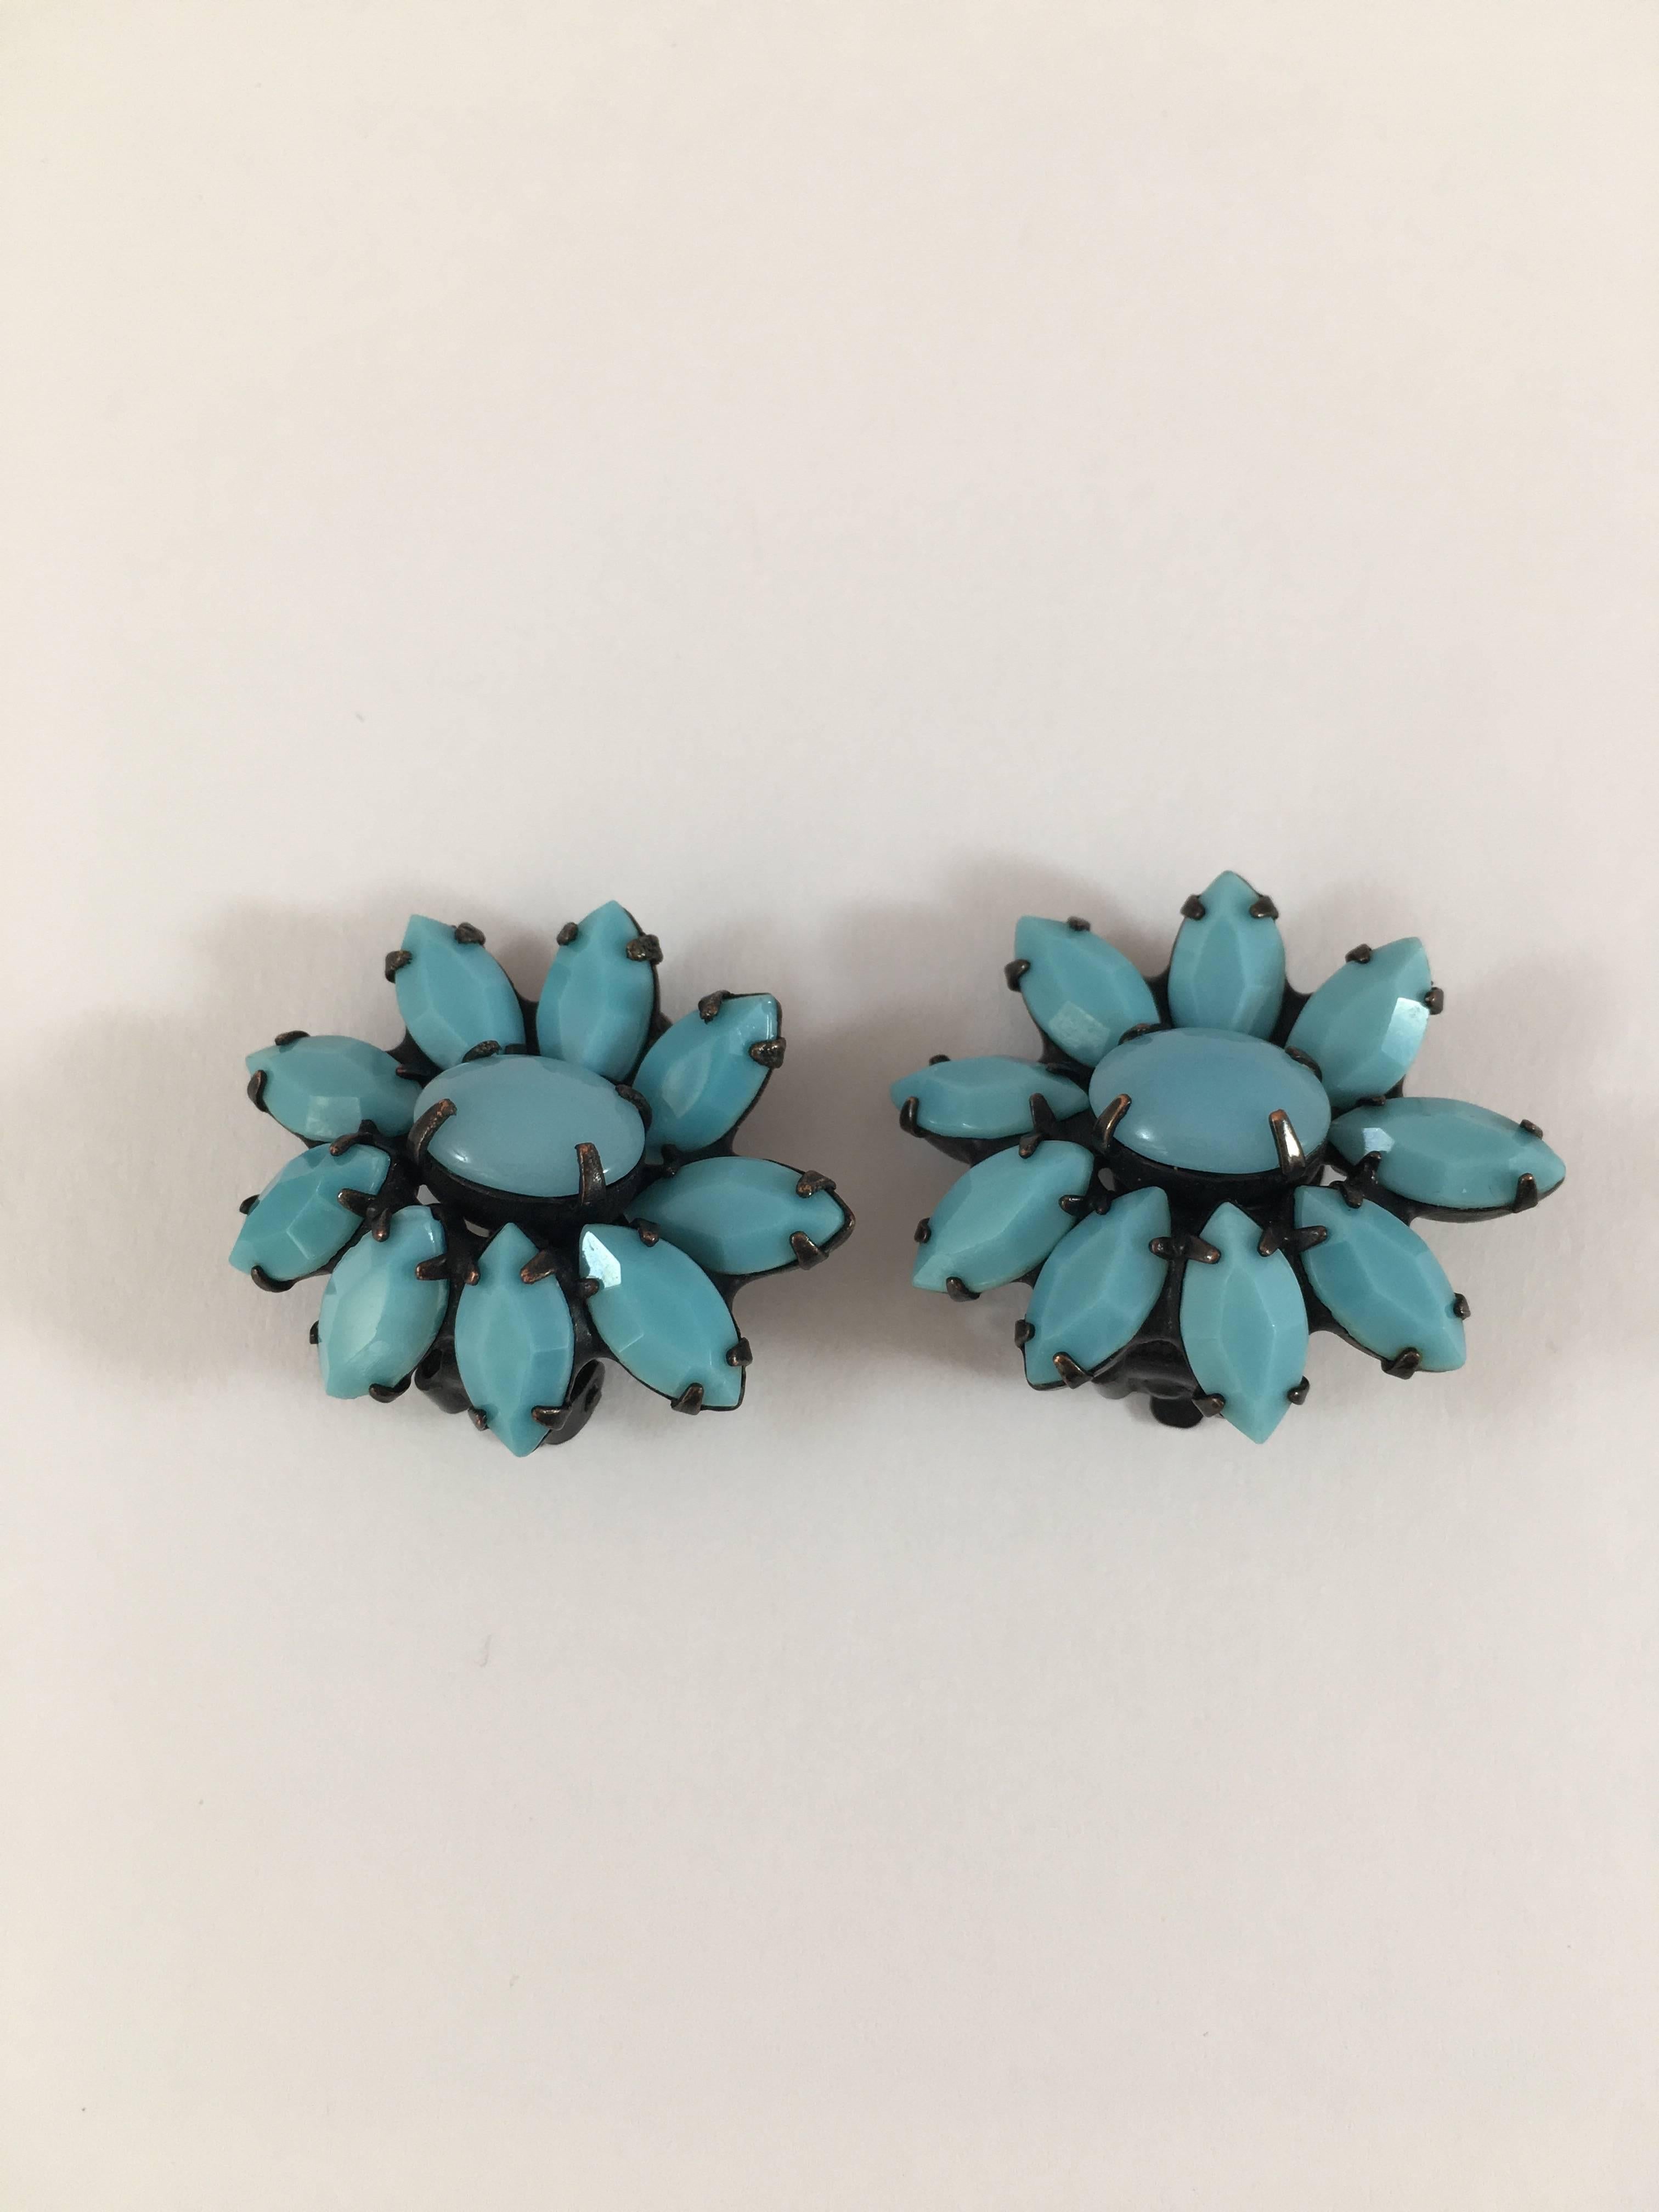 This is a pair of 1960s turquoise colored Weiss flower clip-on earrings. They are made out of opaque turquoise colored glass stones set in japanned metal. They are in excellent condition and so fun for the Spring and Summer! They are signed 'Weiss'